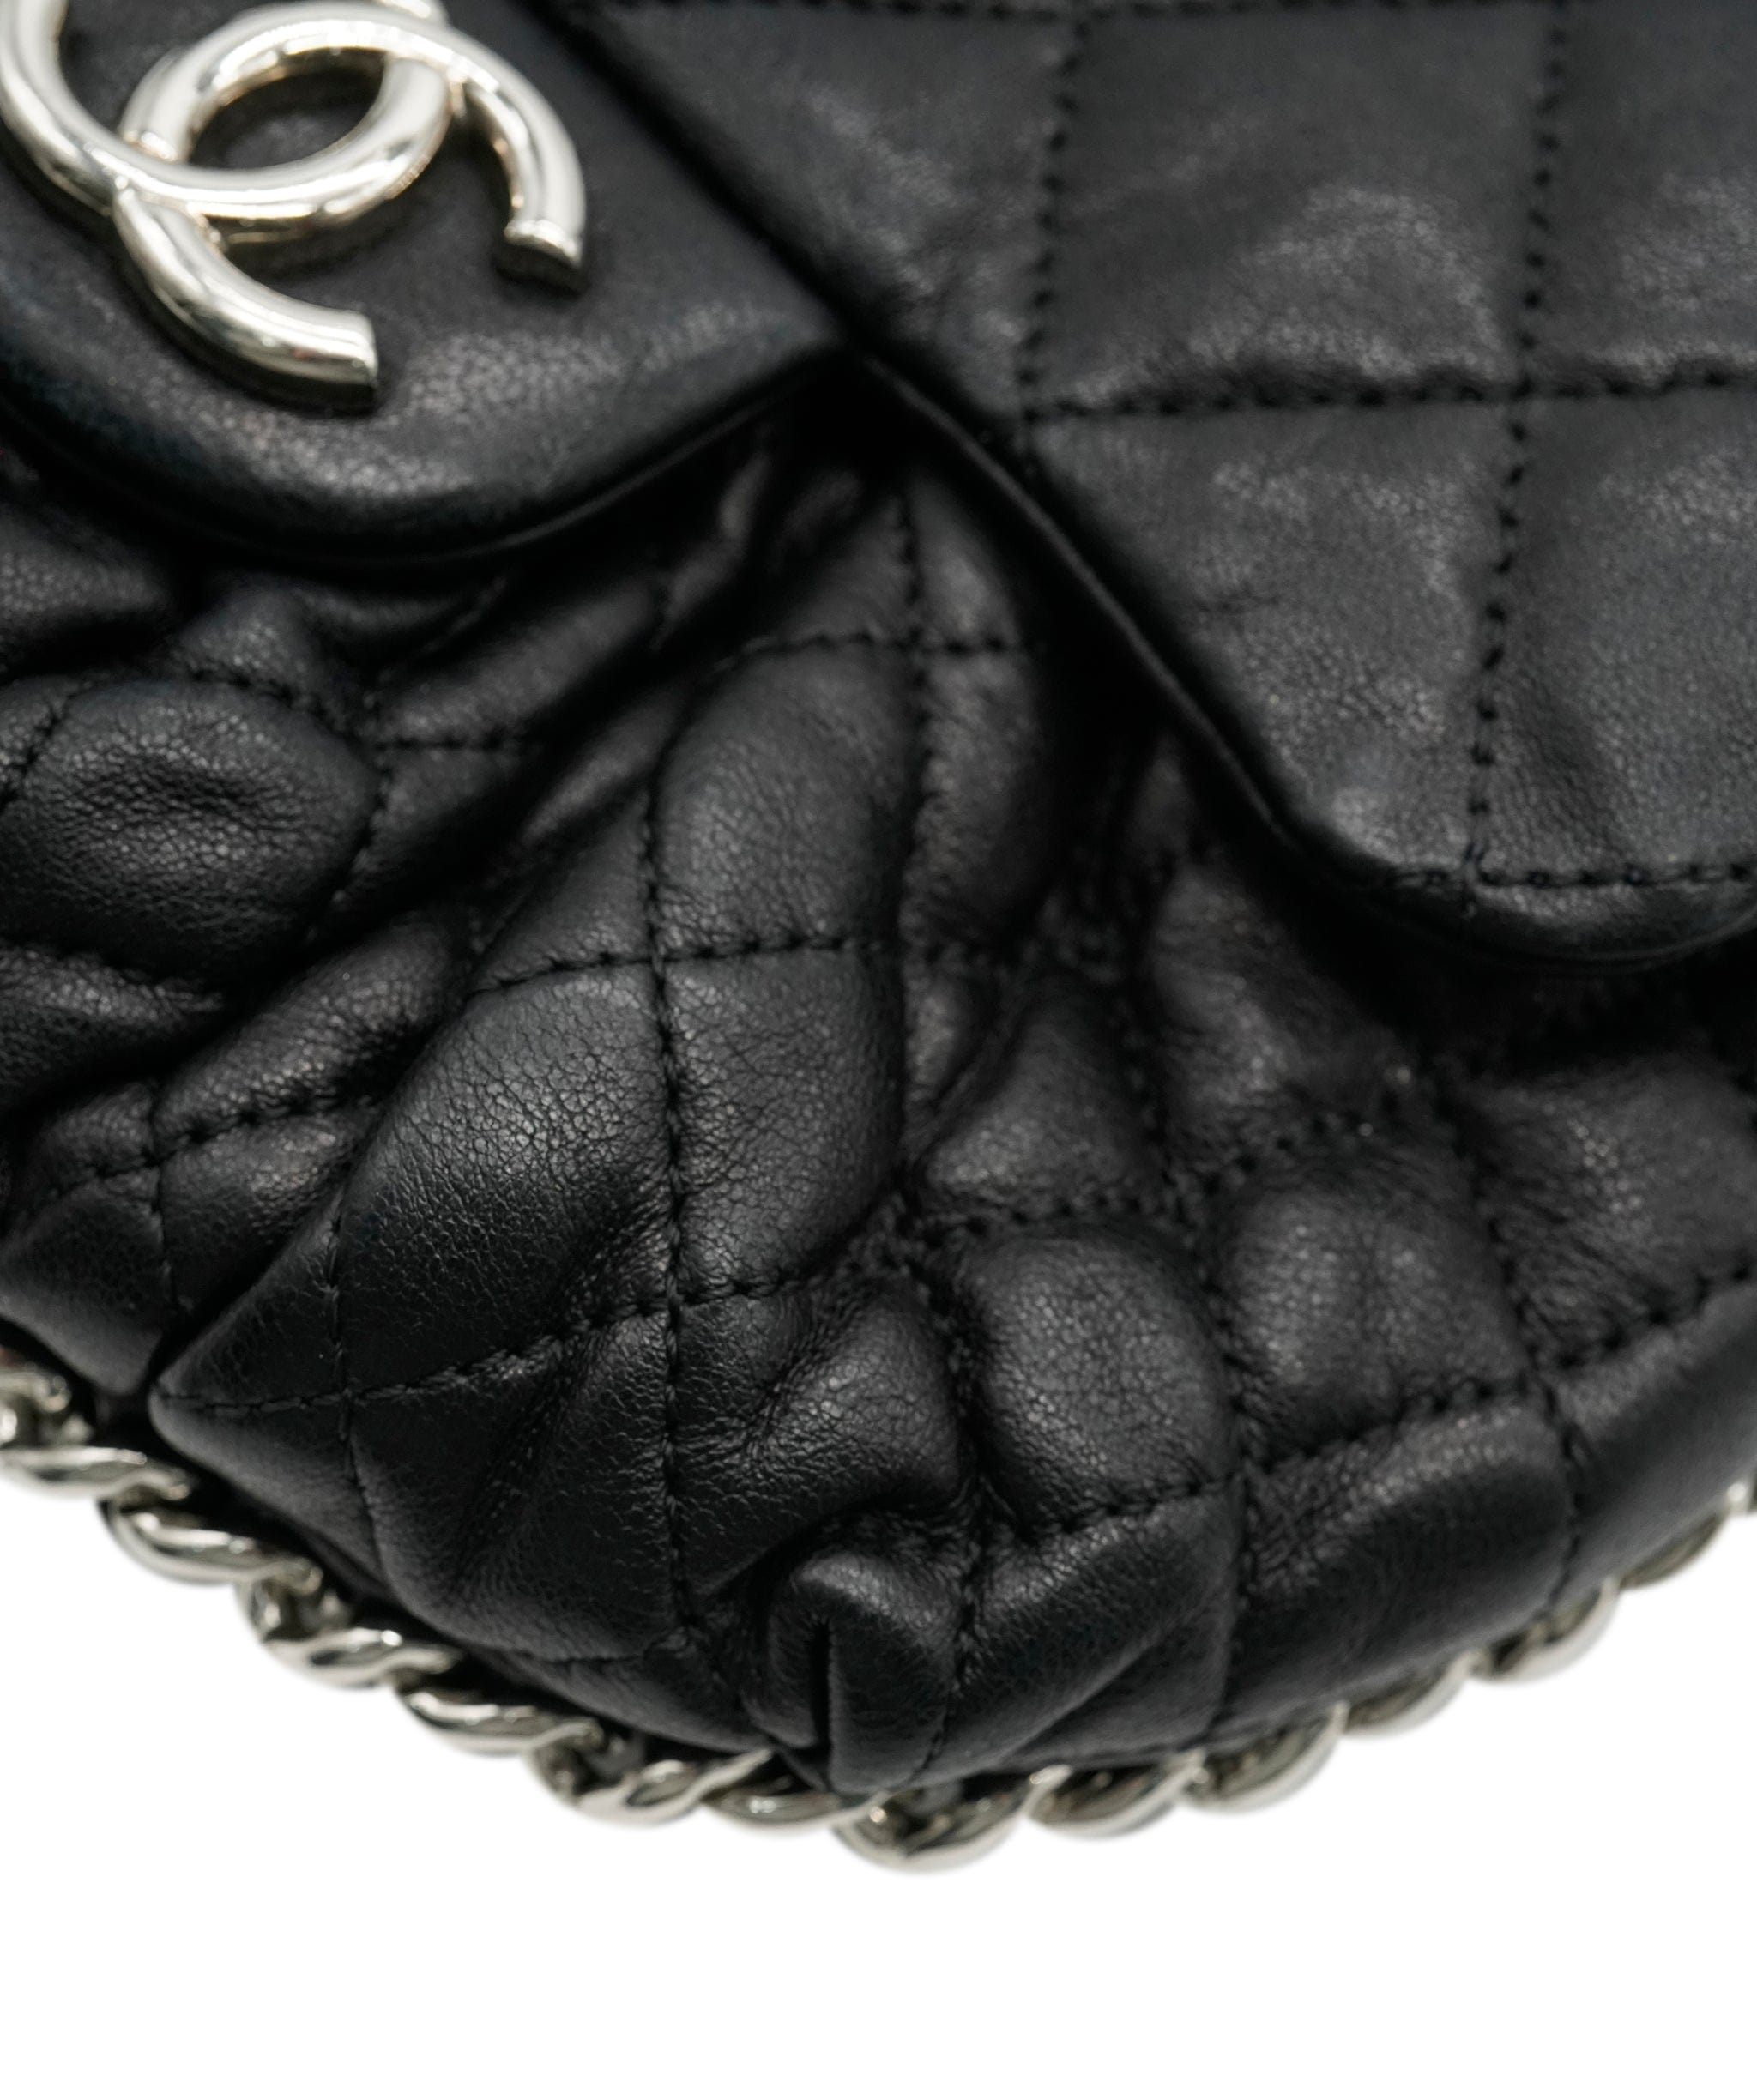 Chanel Chanel Black Washed Lambskin Quilted Chain Around Messenger ABC0564